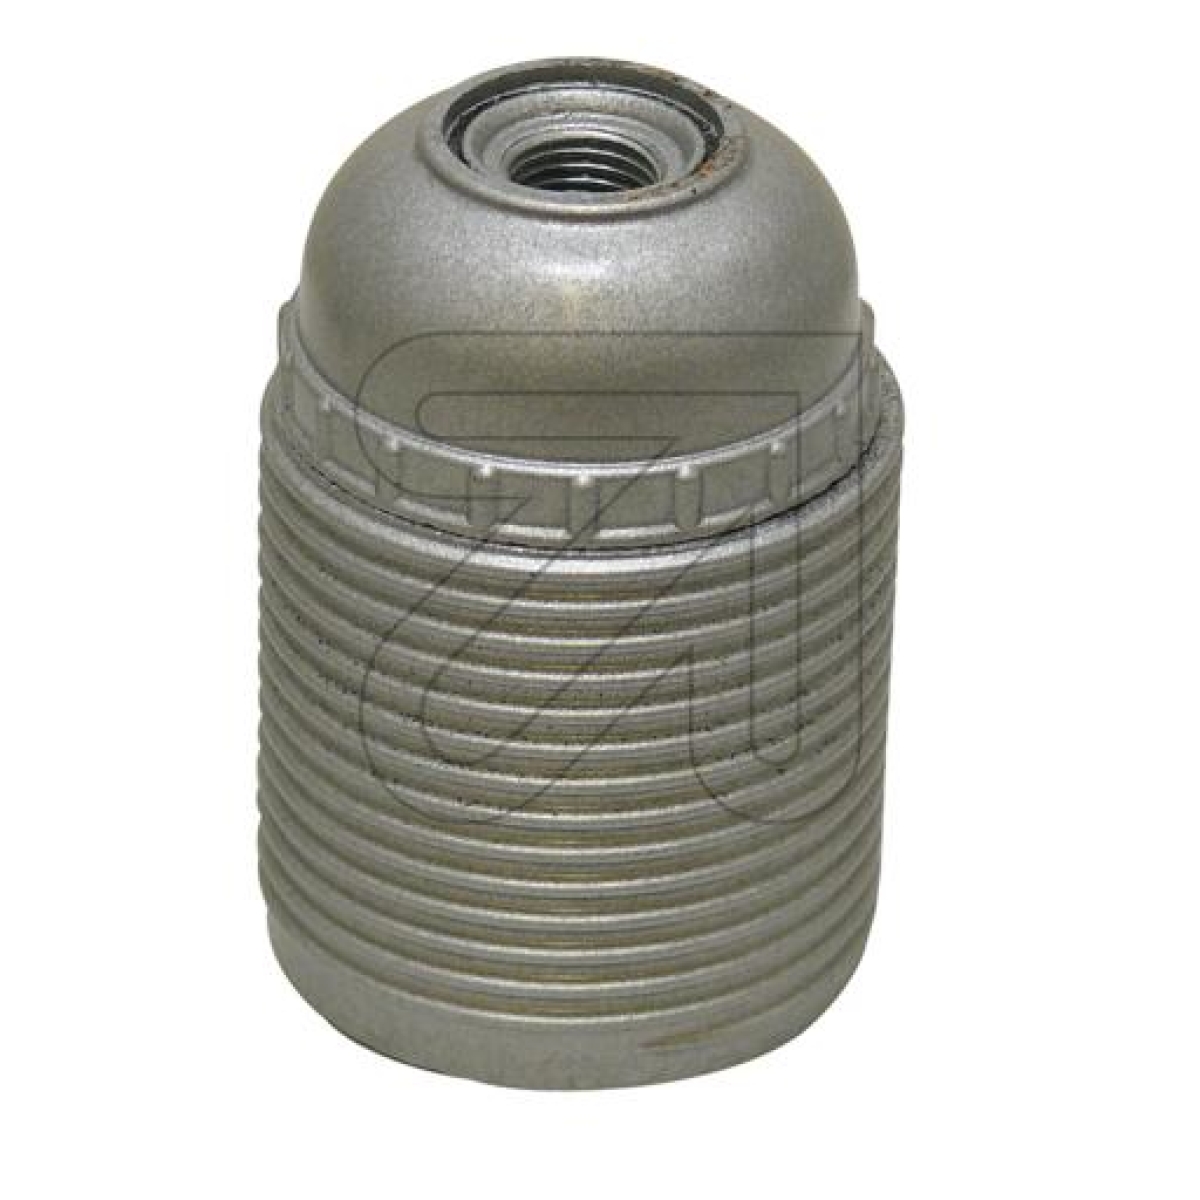 electroplastIso socket with external thread E27 silver-Price for 5 pcs.Article-No: 605305